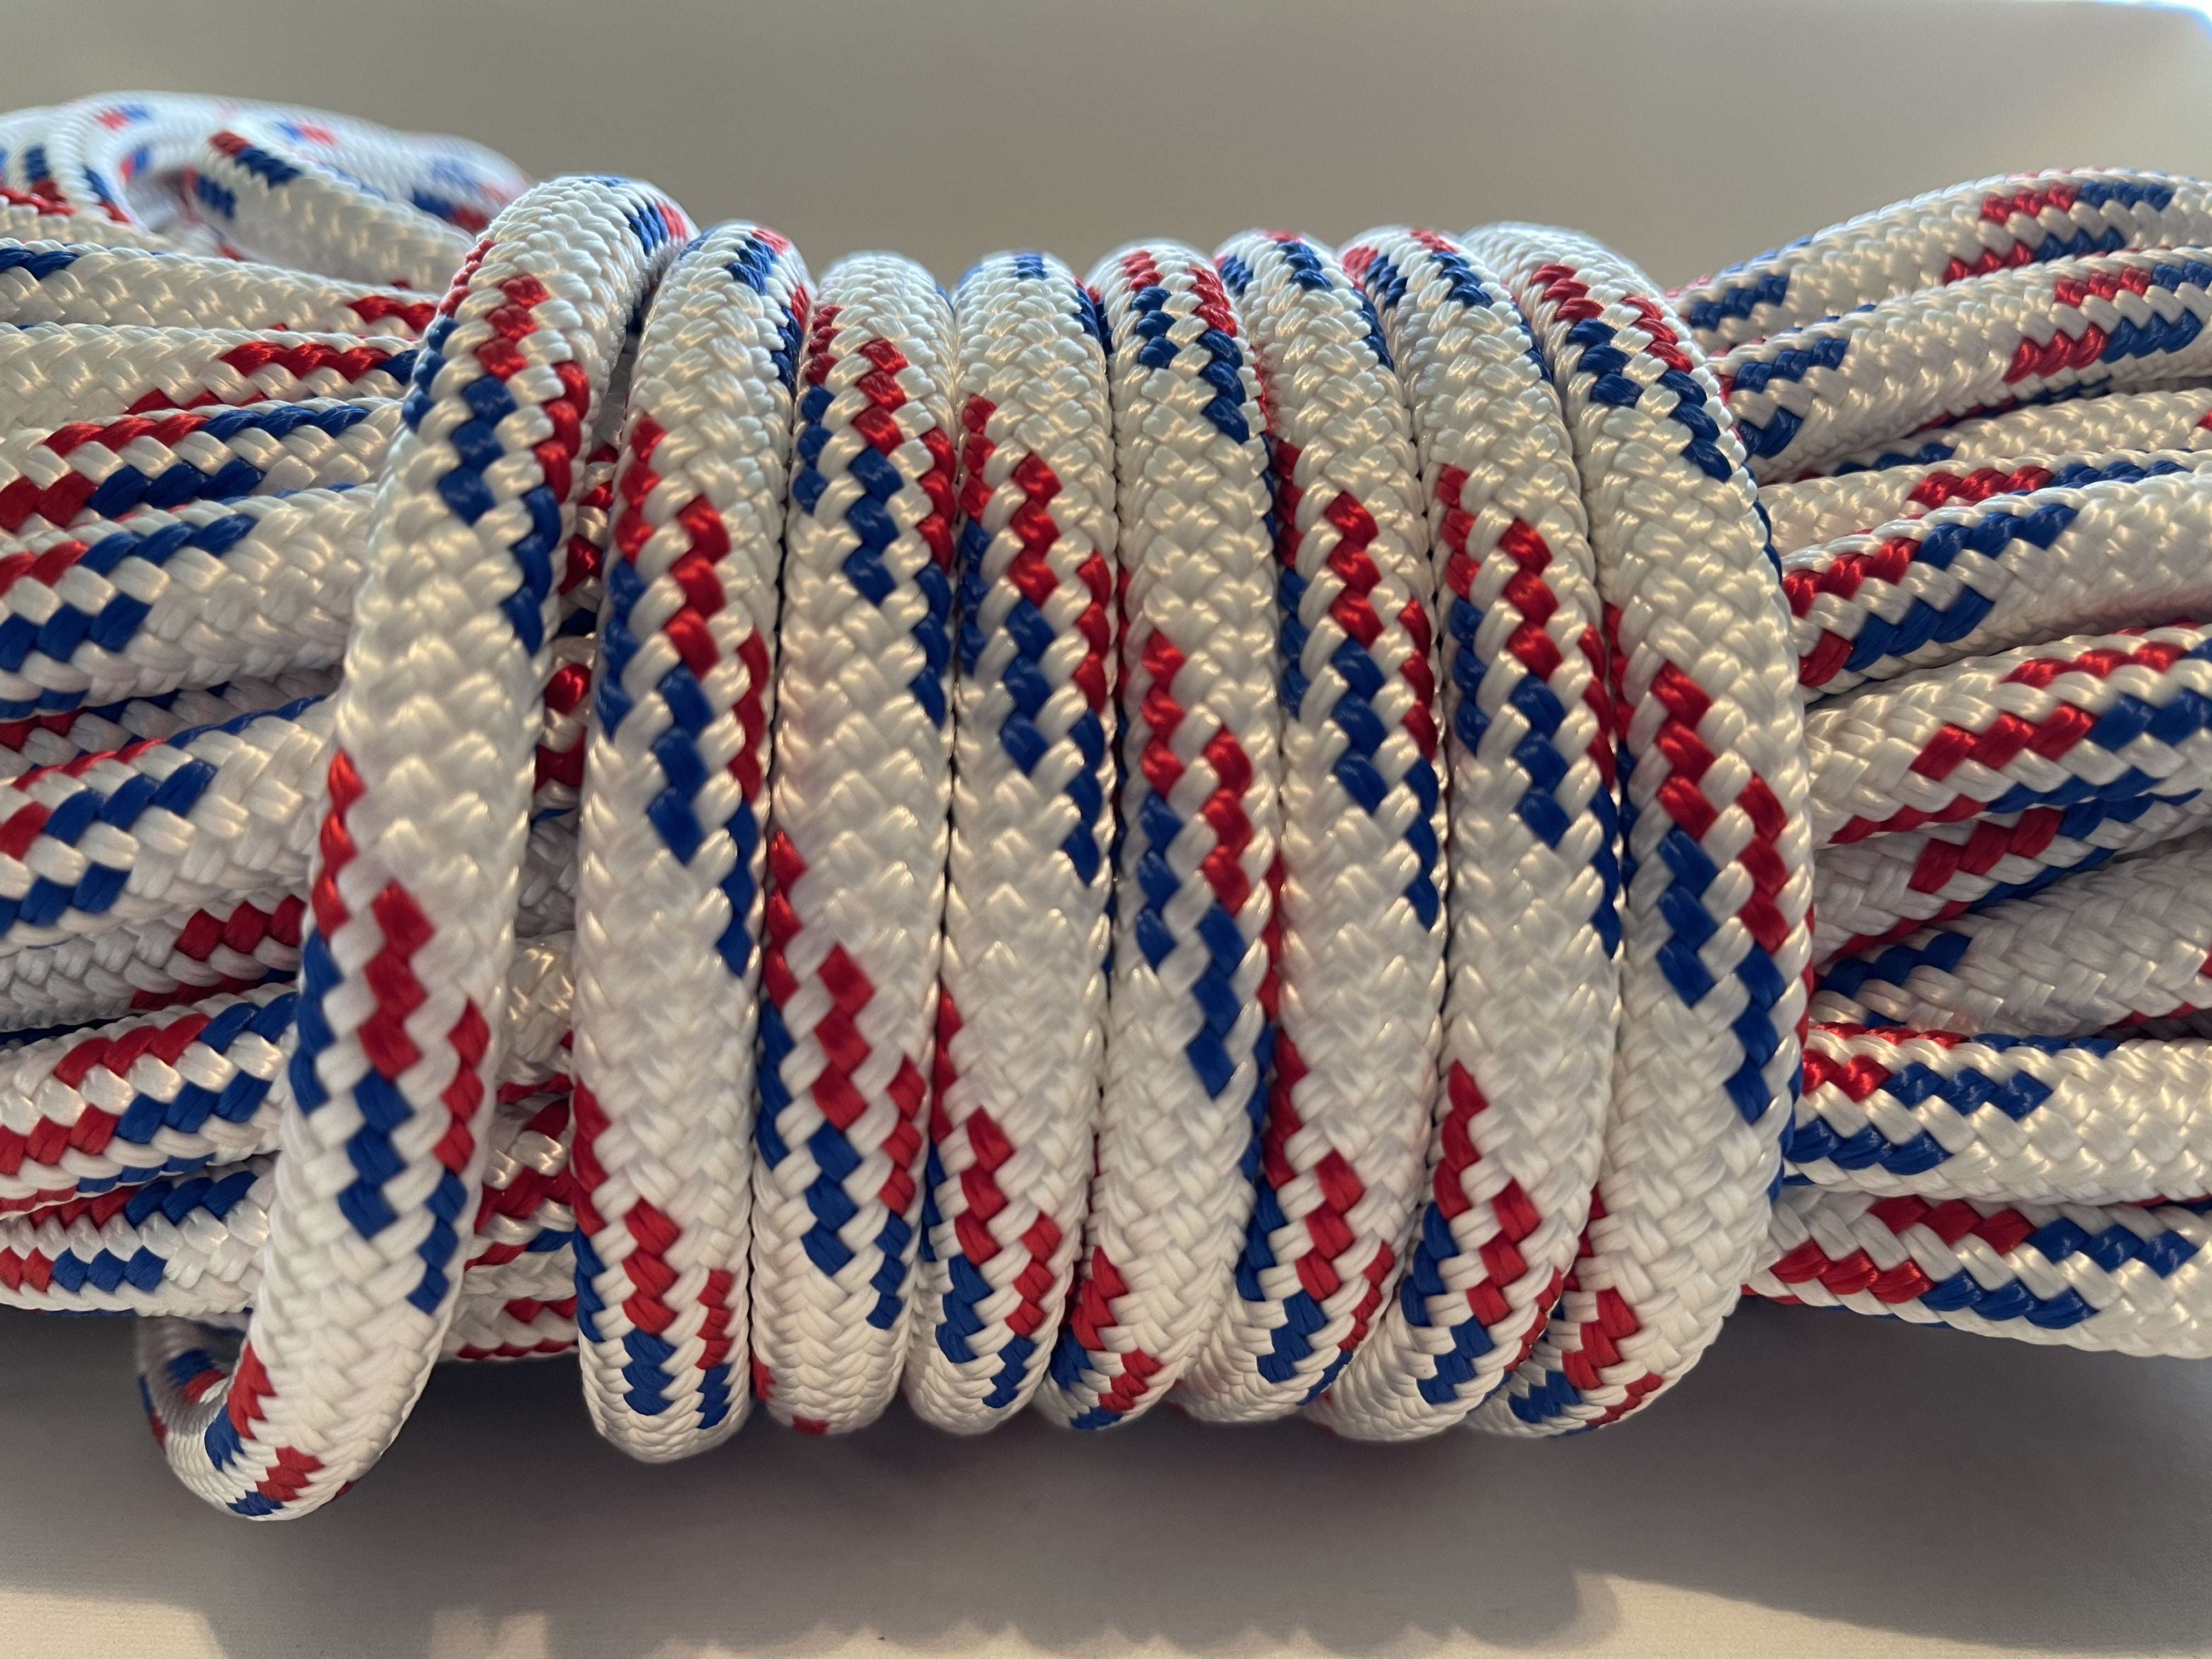 Double Braid-Yacht Braid Polyester Rope 3/8" x 150 ft Red/White US Made 